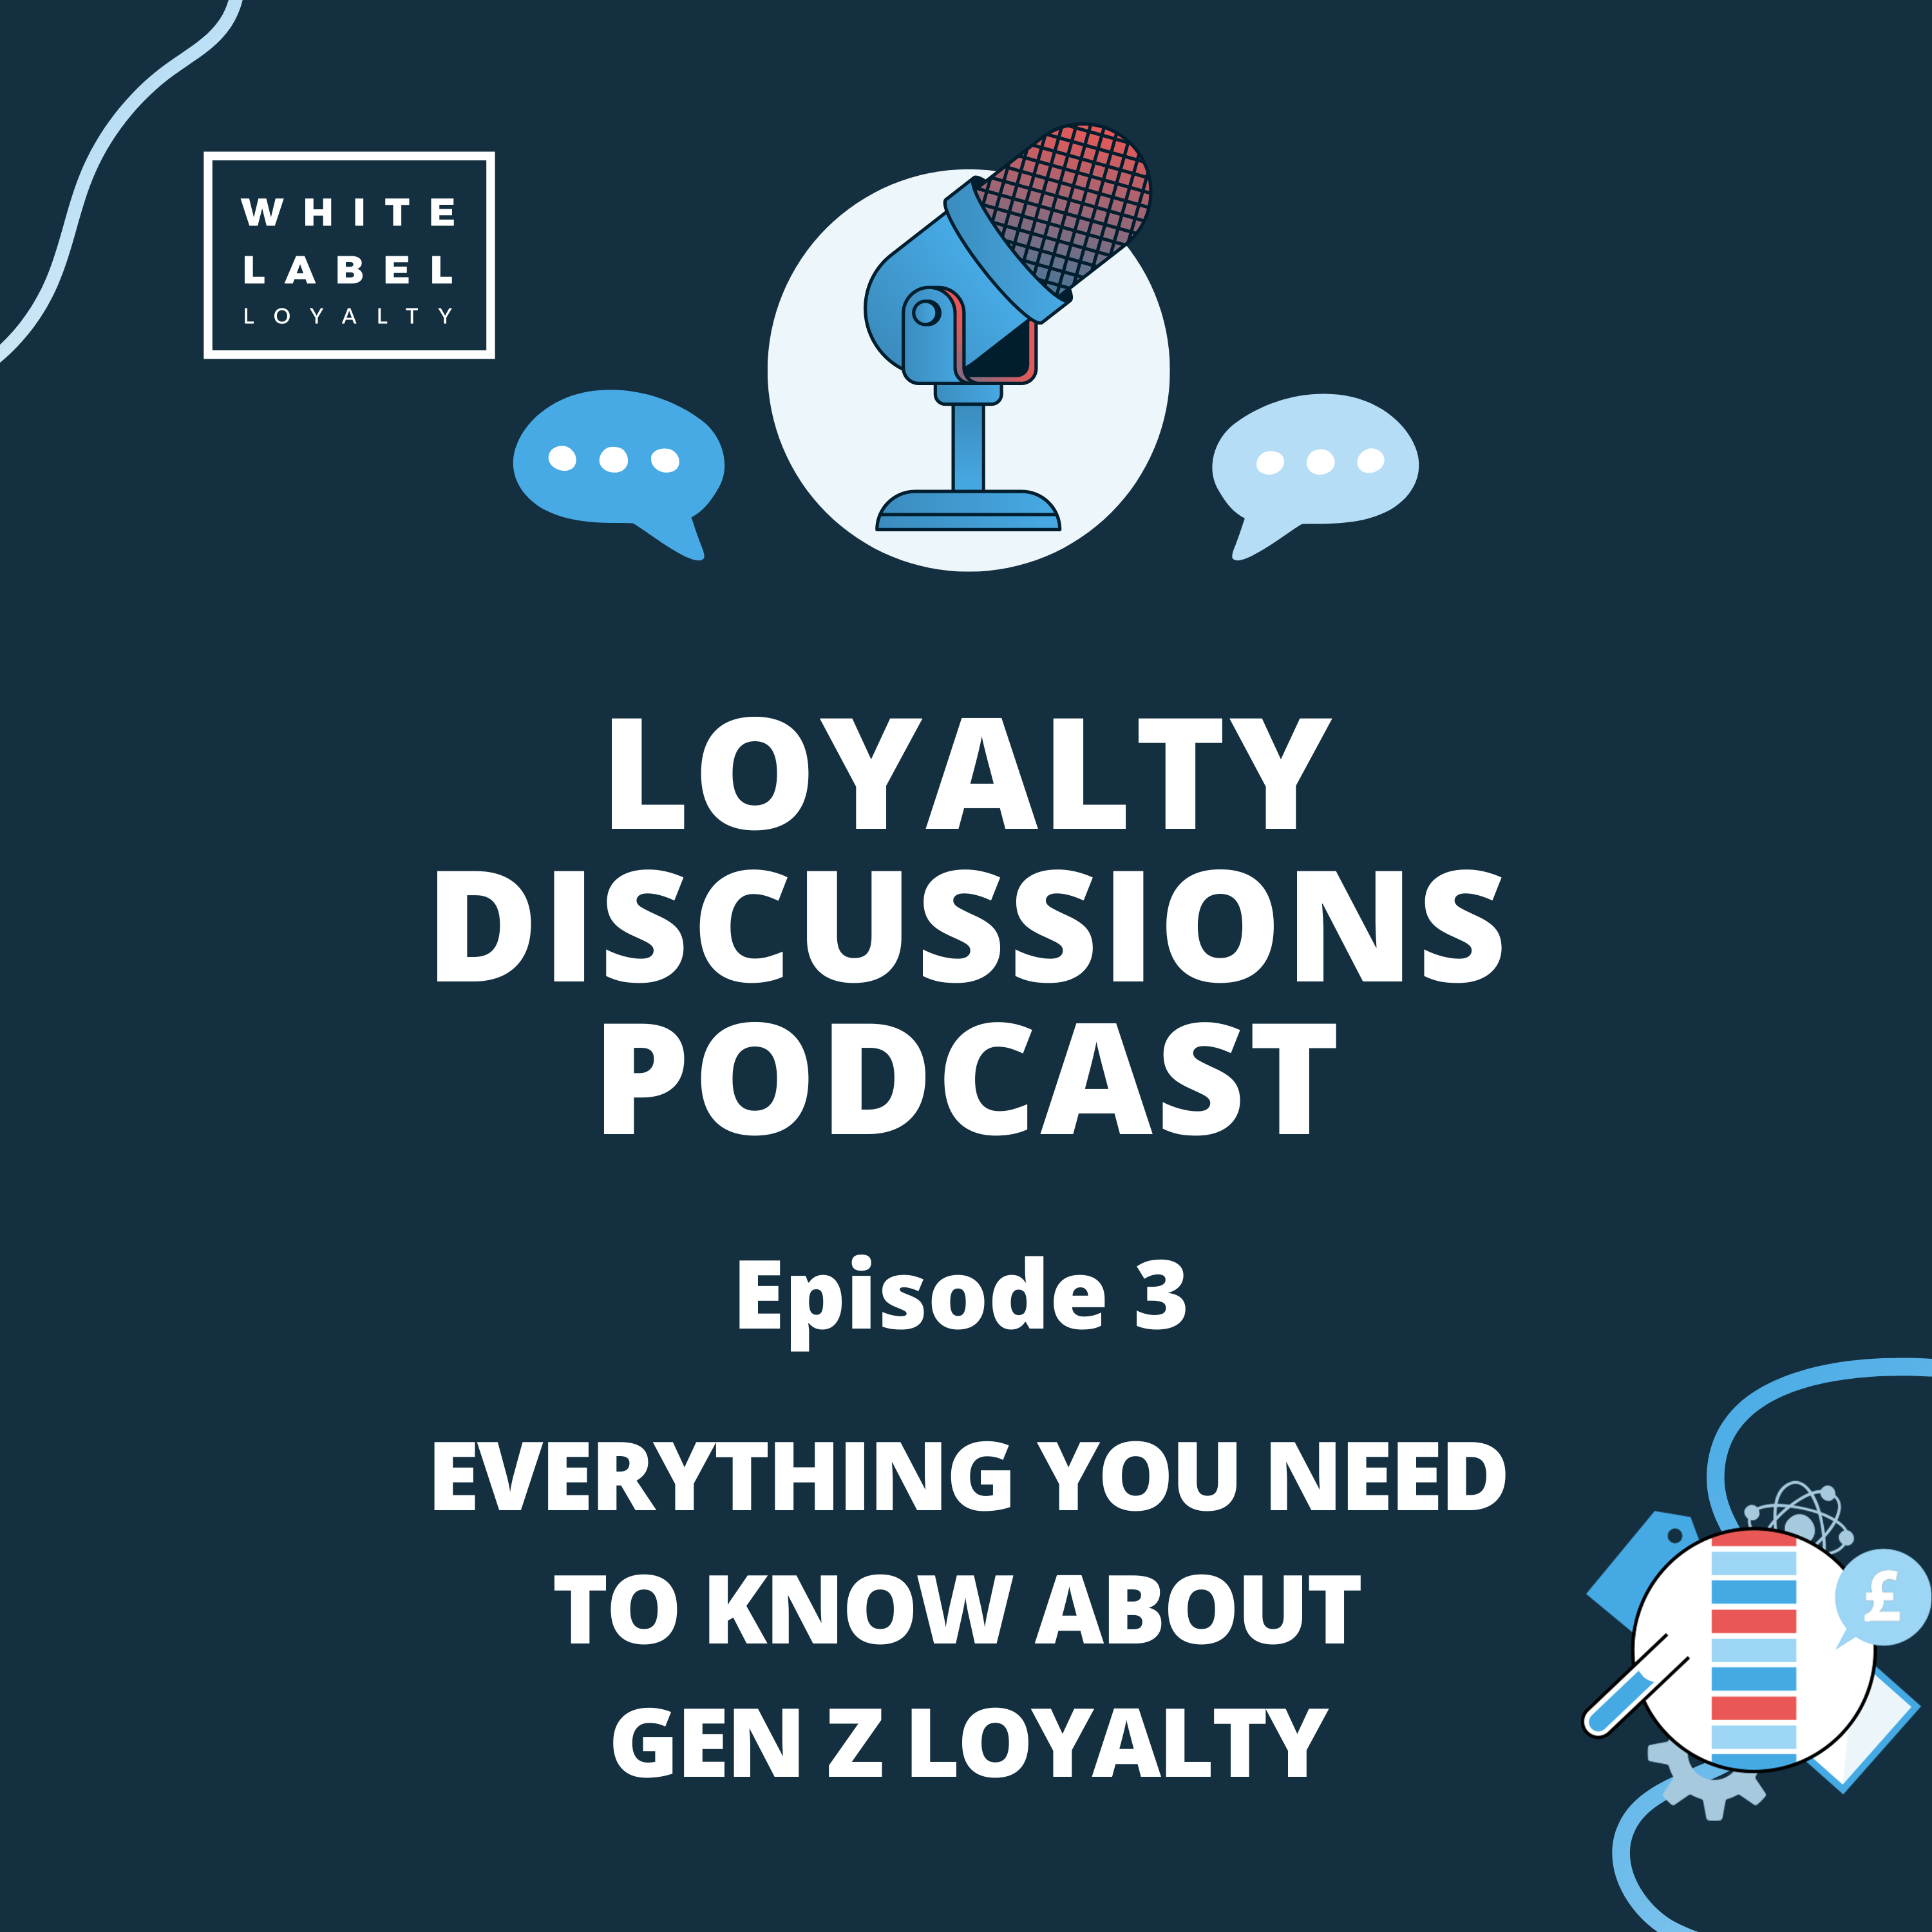 Everything you need to know about Gen Z loyalty